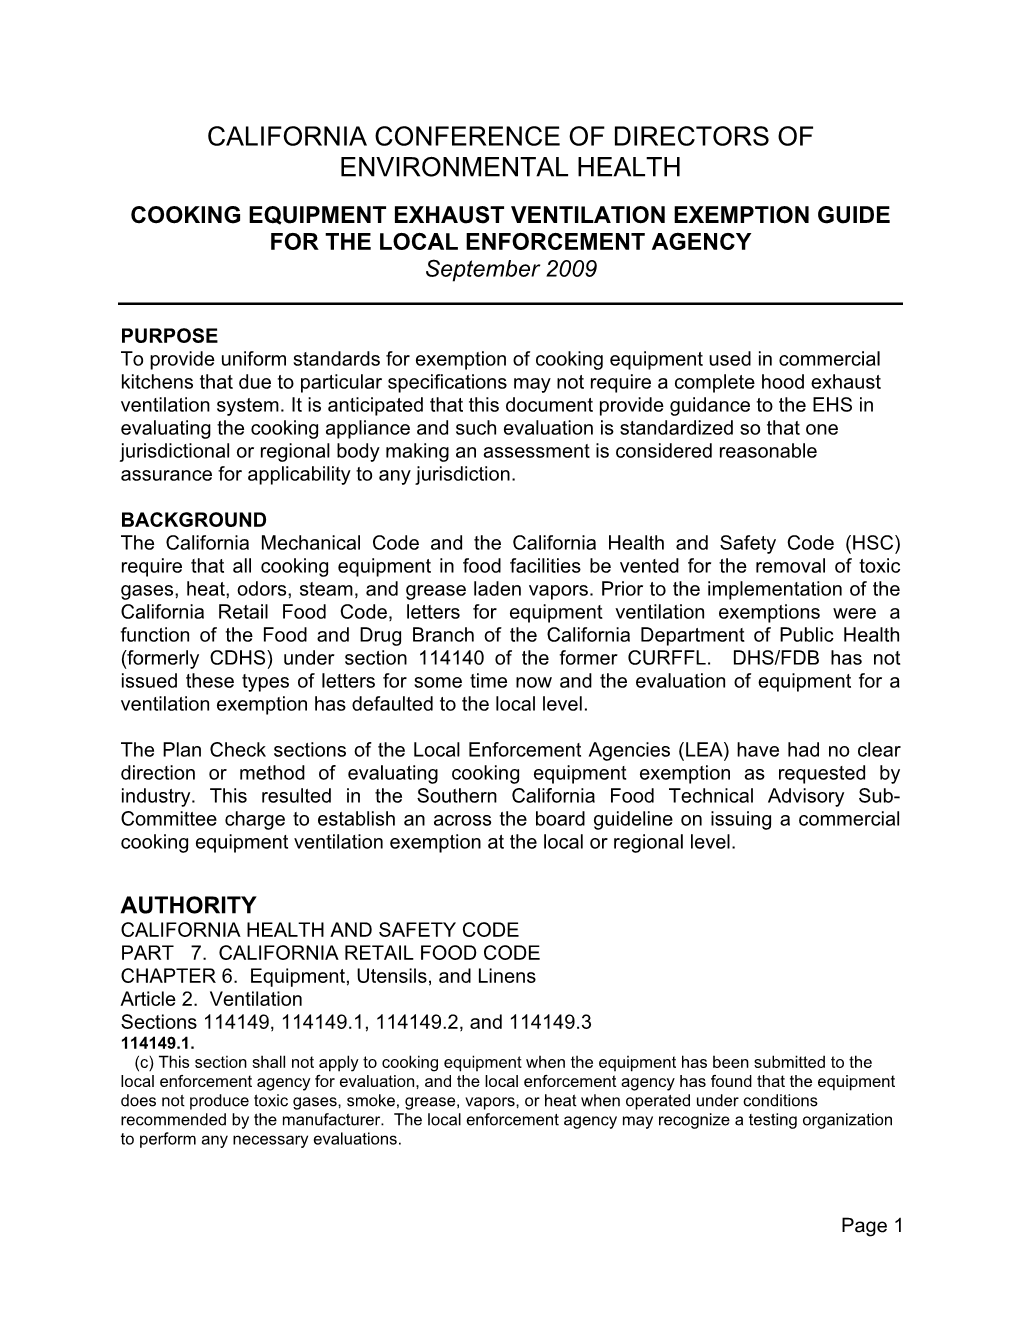 COOKING EQUIPMENT EXHAUST VENTILATION EXEMPTION GUIDE for the LOCAL ENFORCEMENT AGENCY September 2009